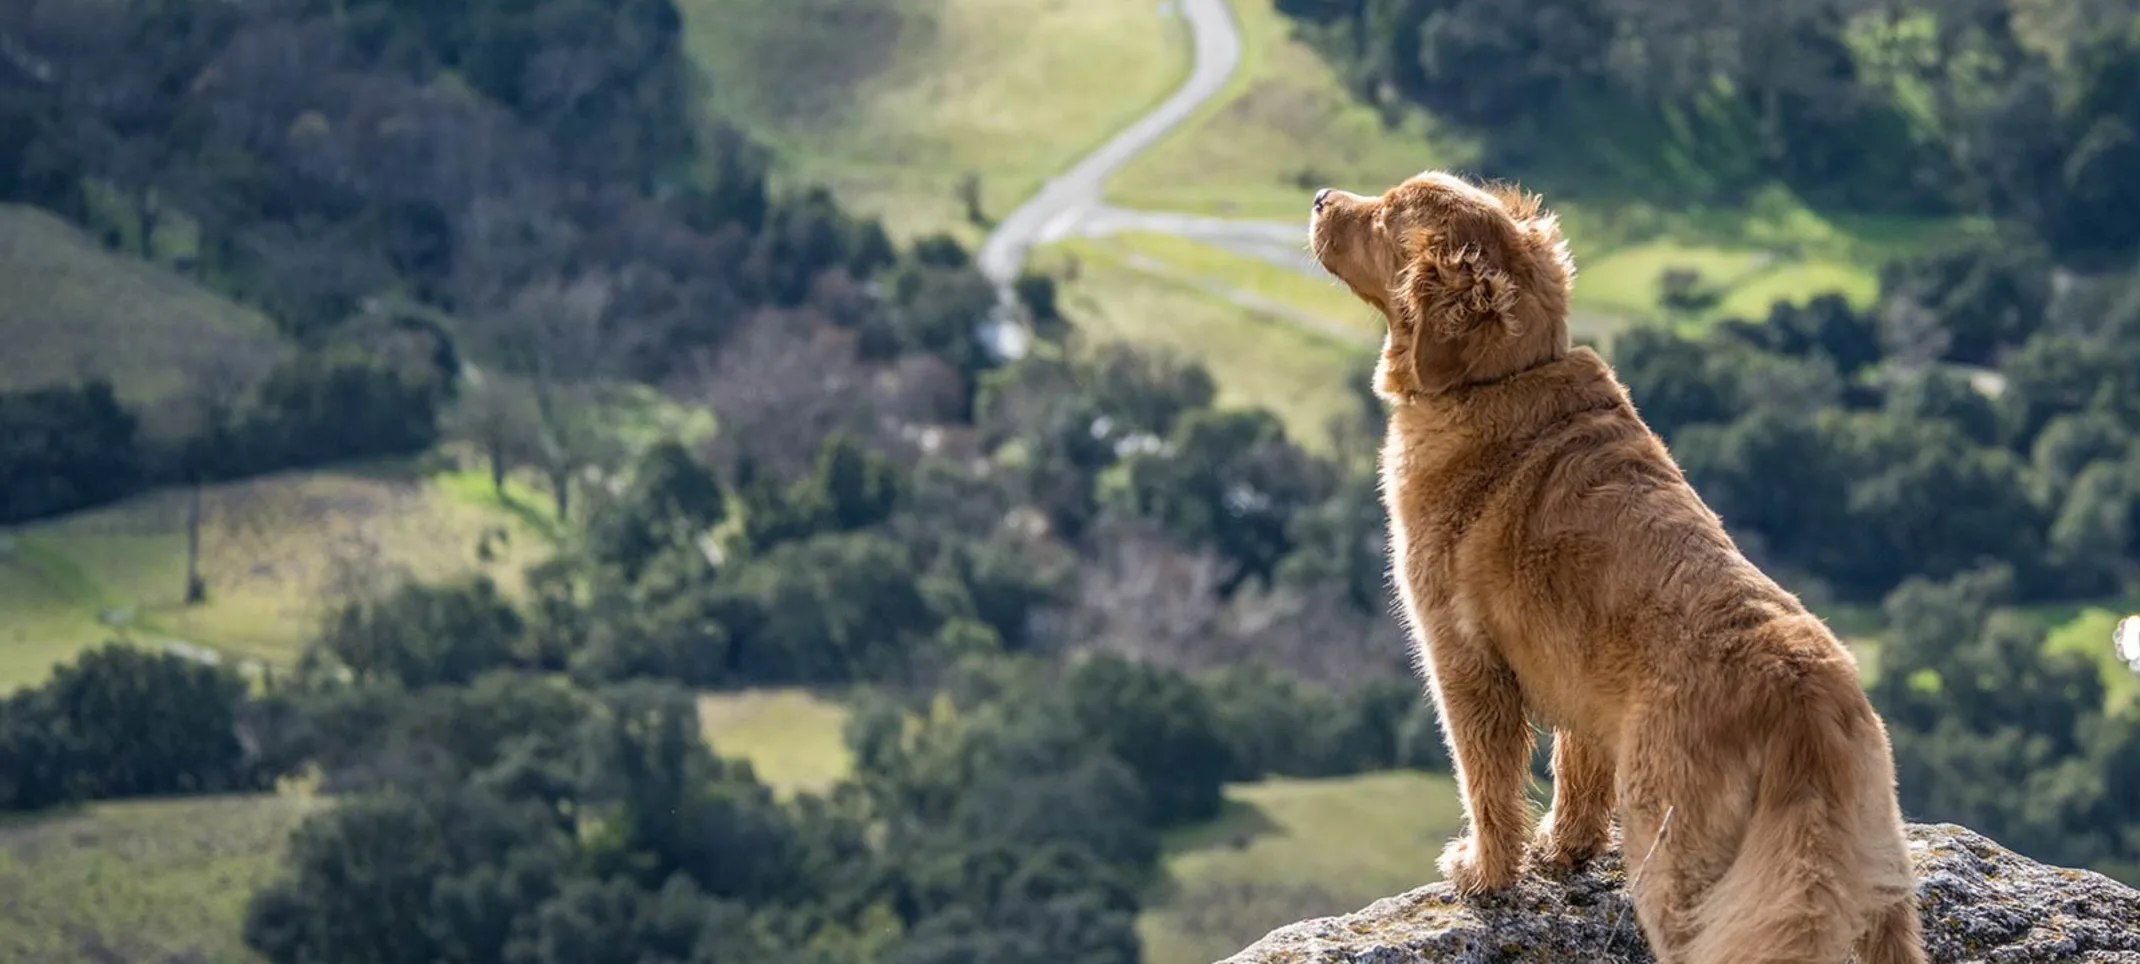 A brown dog outside staring off a rocky cliff with trees below